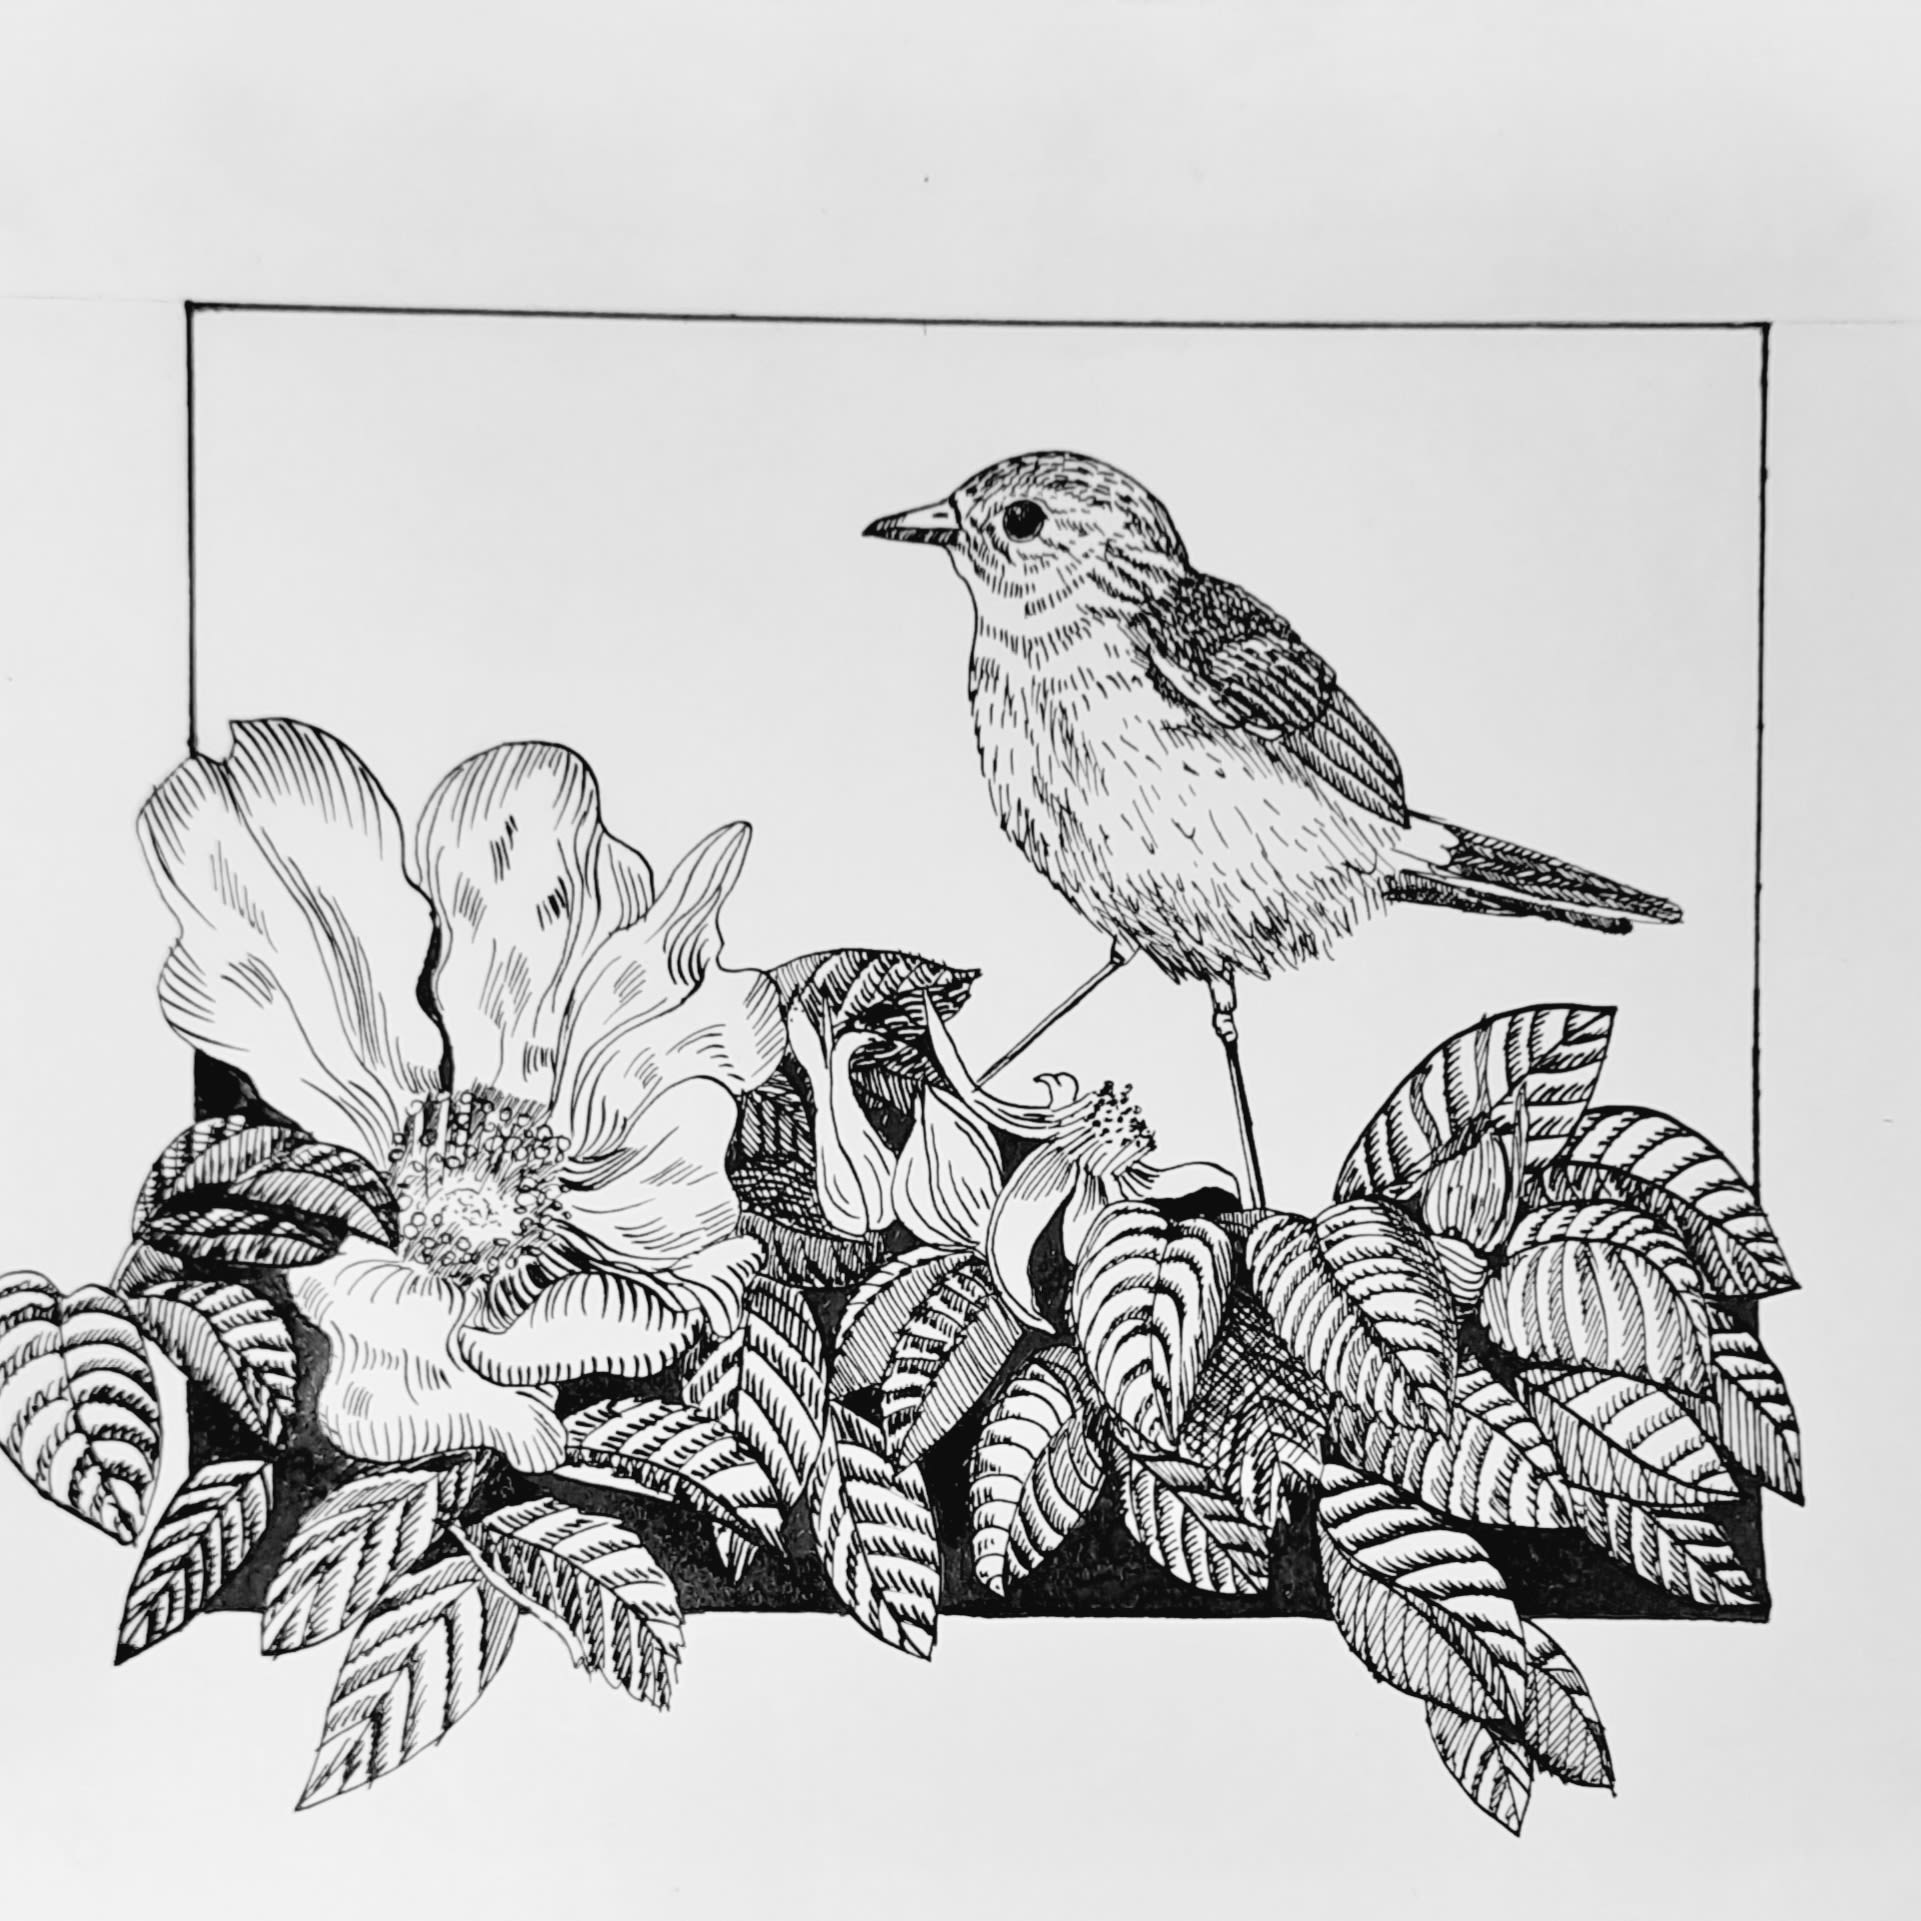 My project in Dip Pen and Ink Illustration: Capturing The Natural World ...